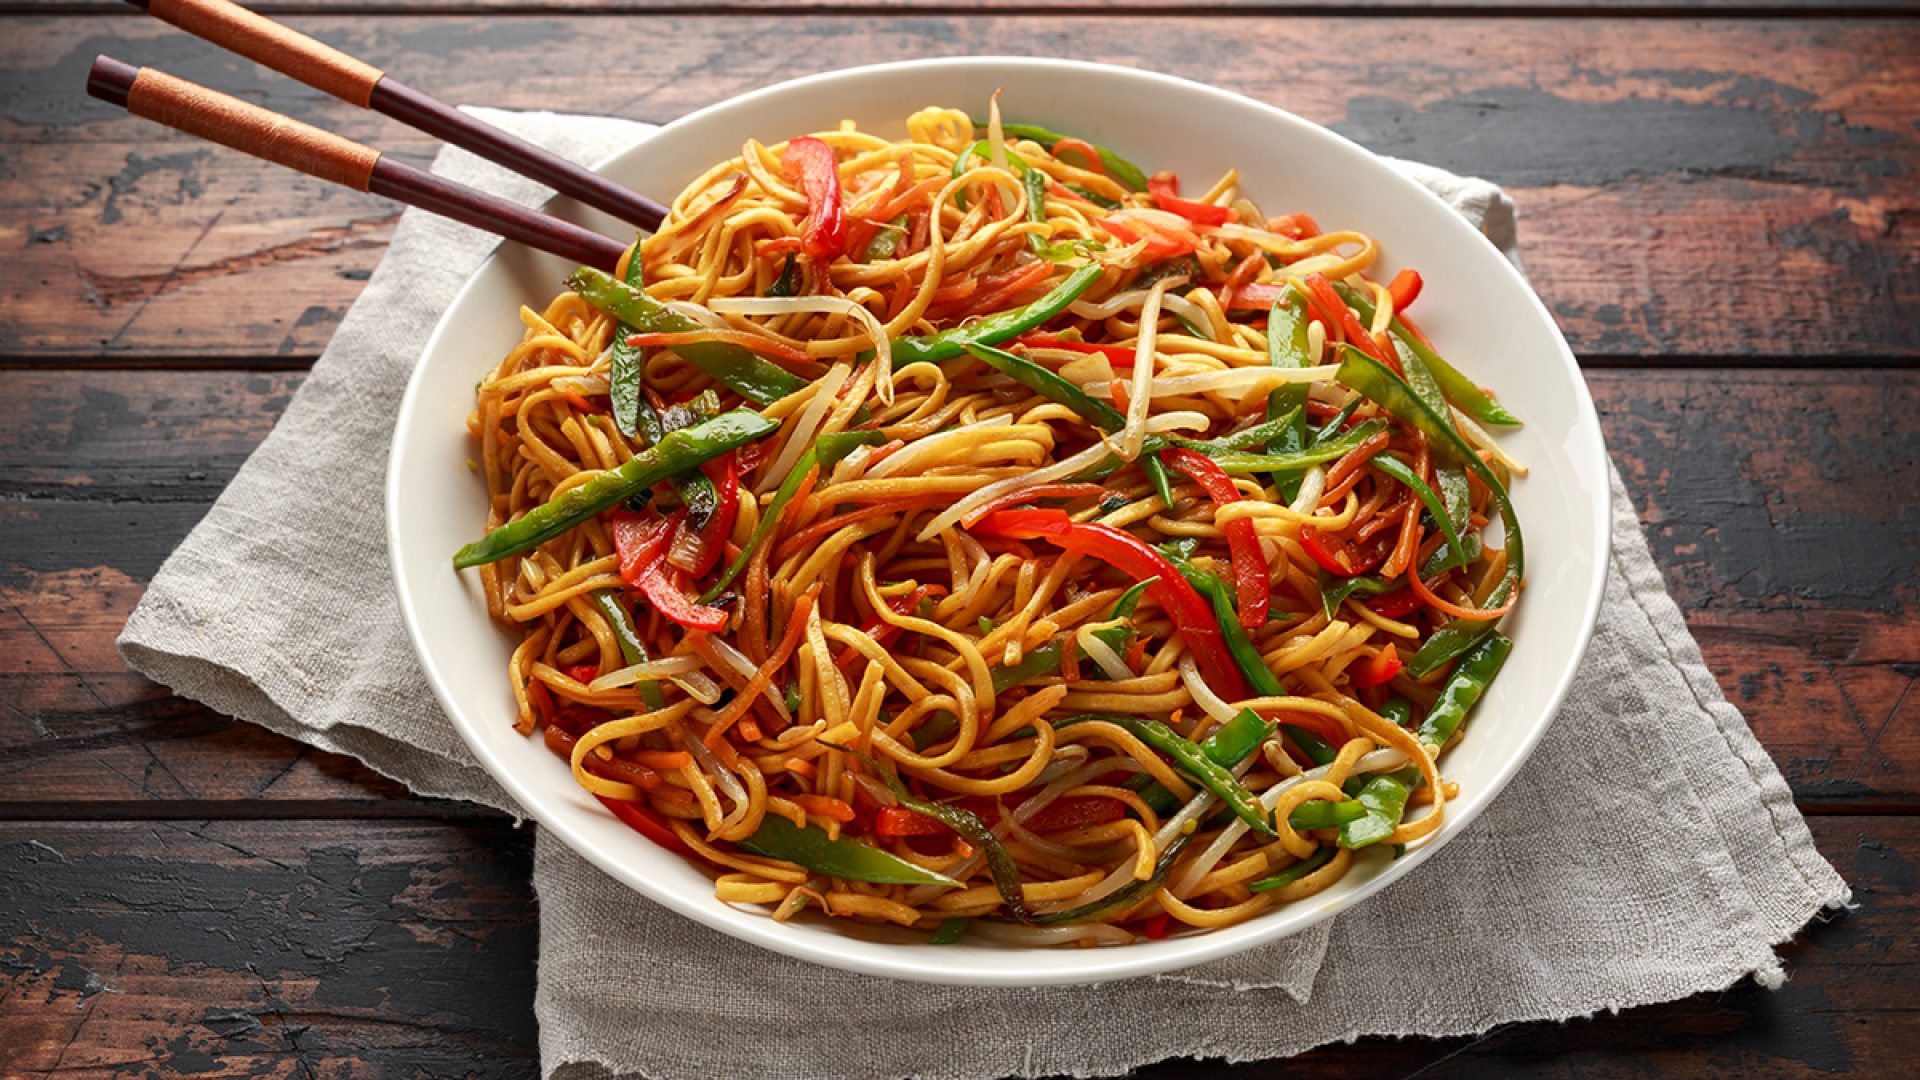 Chow Mein vs. Lo Mein: What's the Real Difference? - Eat This Not That